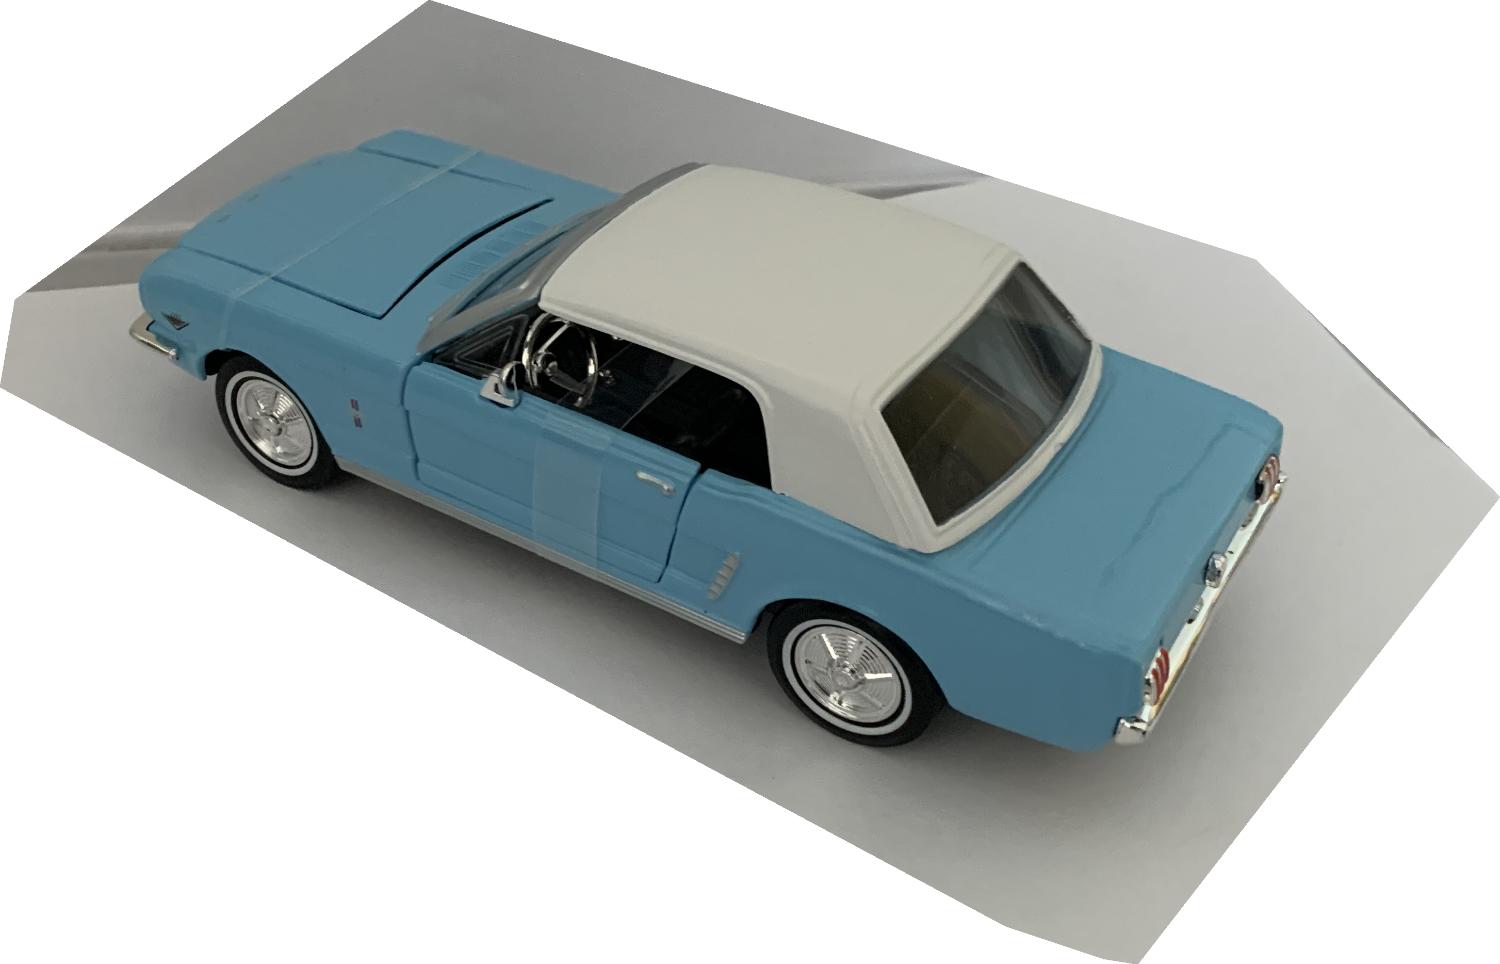 007’s Ford Mustang ½ 1964 in light blue 1:24 scale model from Thunderball 1:24 scale model from Motormax, James Bond 60 Years of Bond